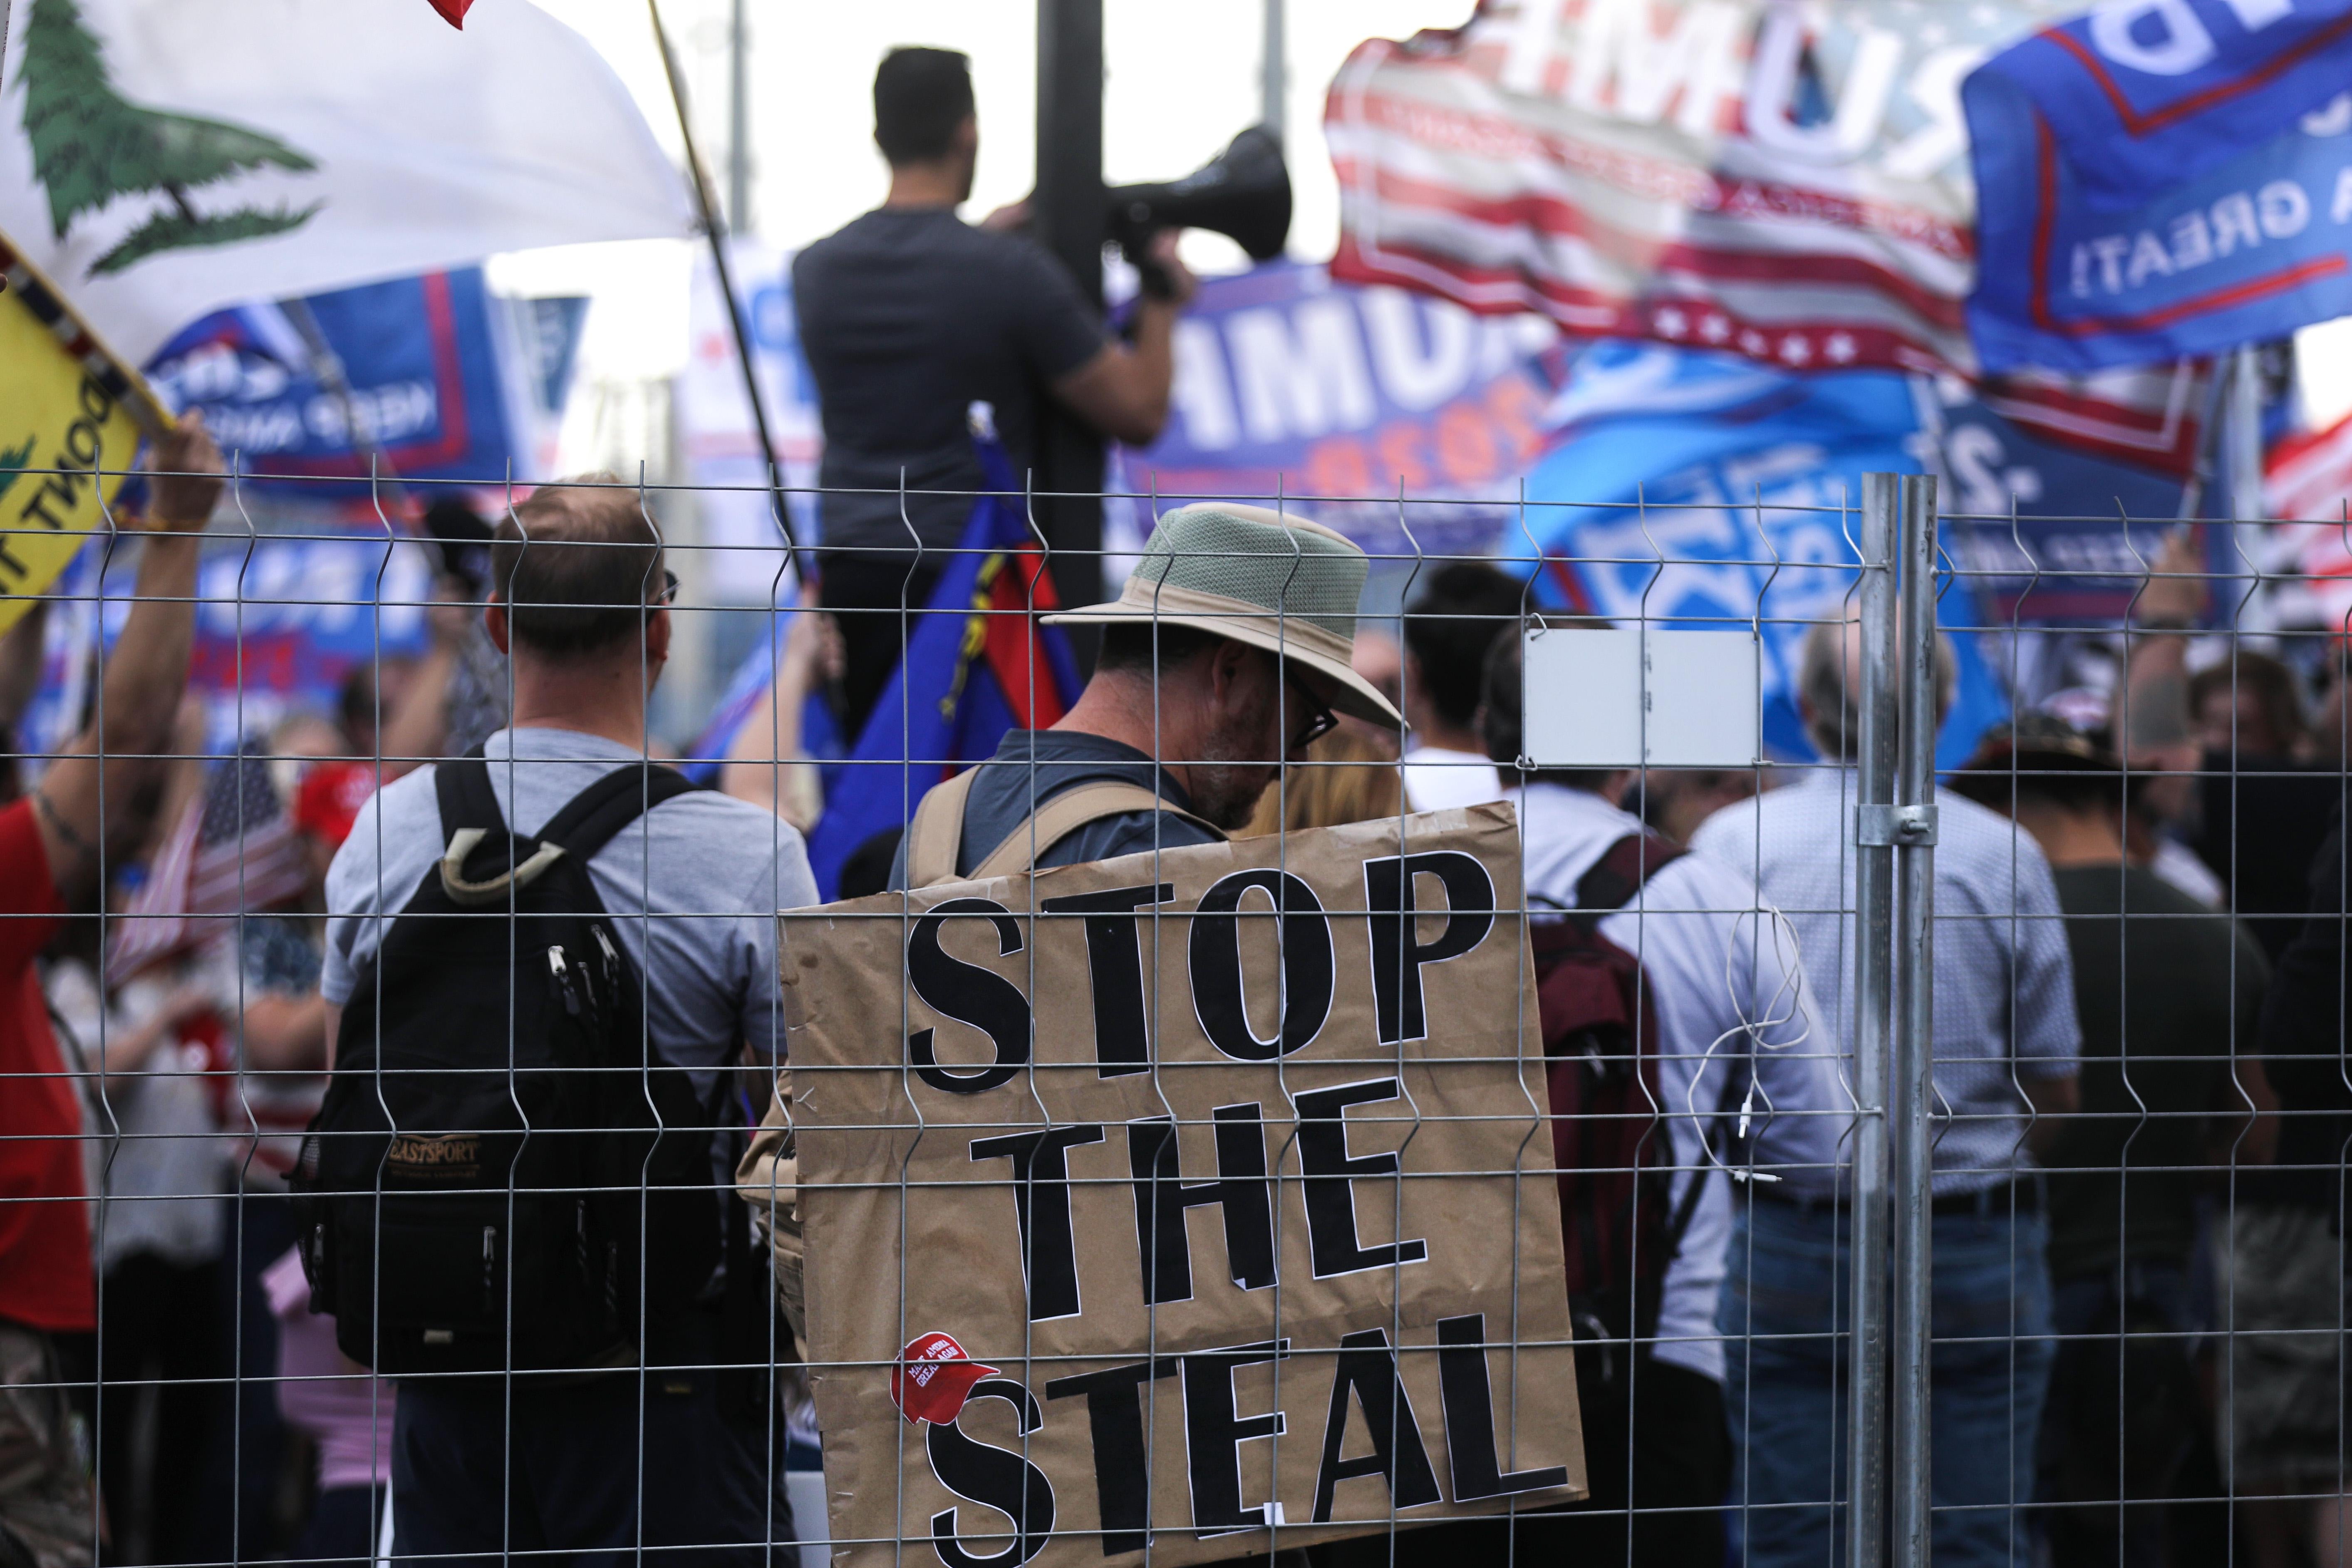 A crowd stands behind a fence with Trump flags and a sign that says "Stop the Steal."